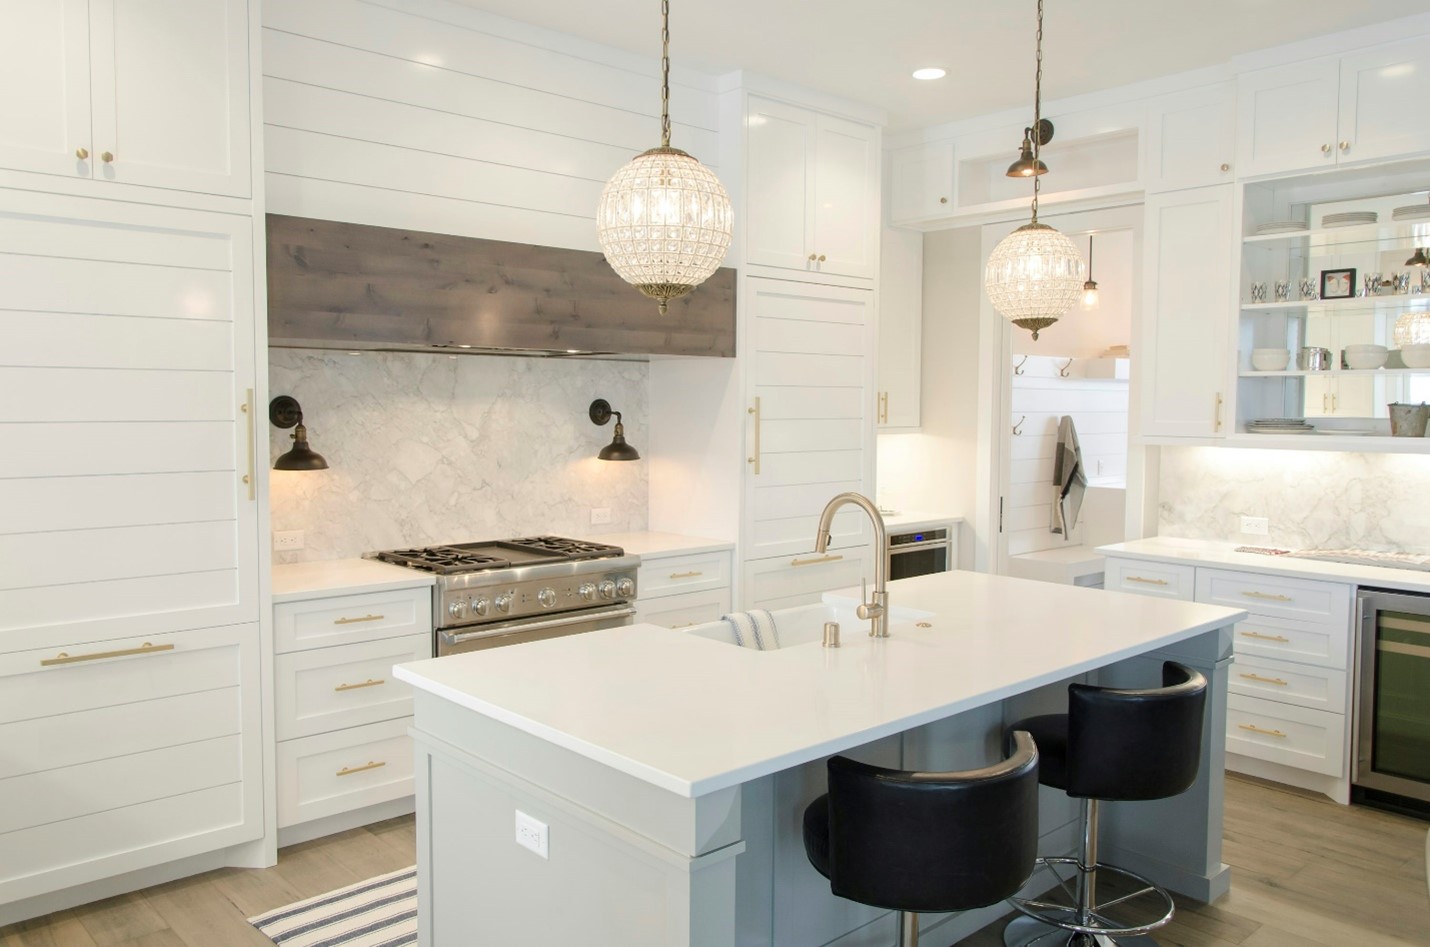 A high-end kitchen with bright aesthetics and lighting.